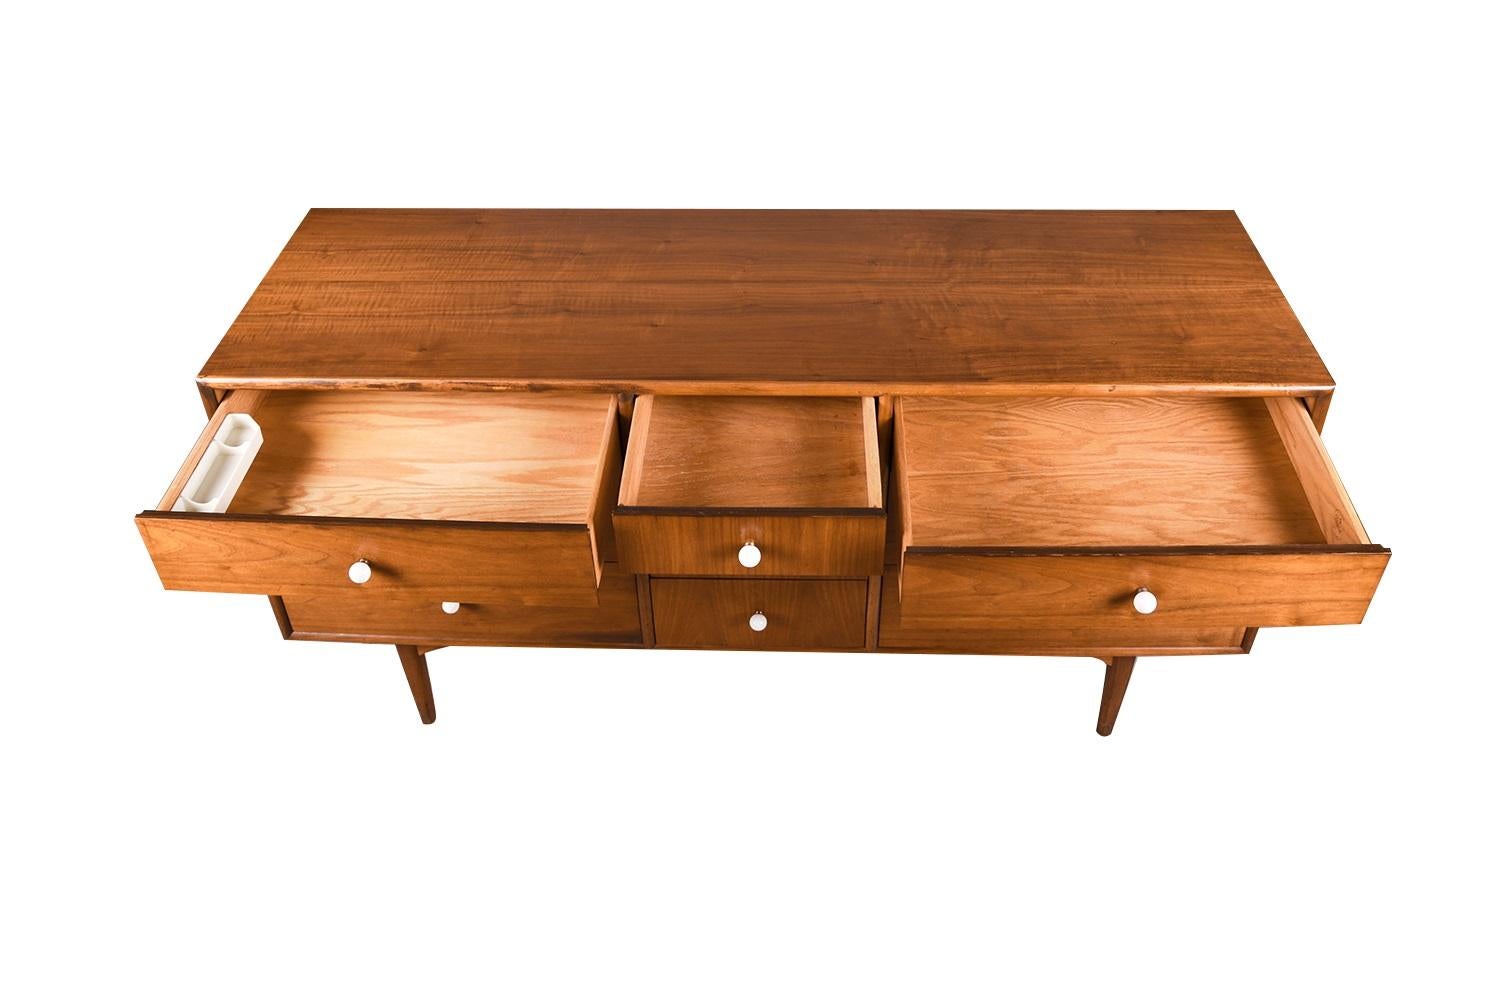 Fabulous Mid-Century Modern 10 drawer triple dresser or credenza designed by Kipp Stewart and Stewart MacDougall for Drexel’s Declaration Collection, circa 1960s. Featuring a solid, beautifully grained walnut wood case and rounded convex frame